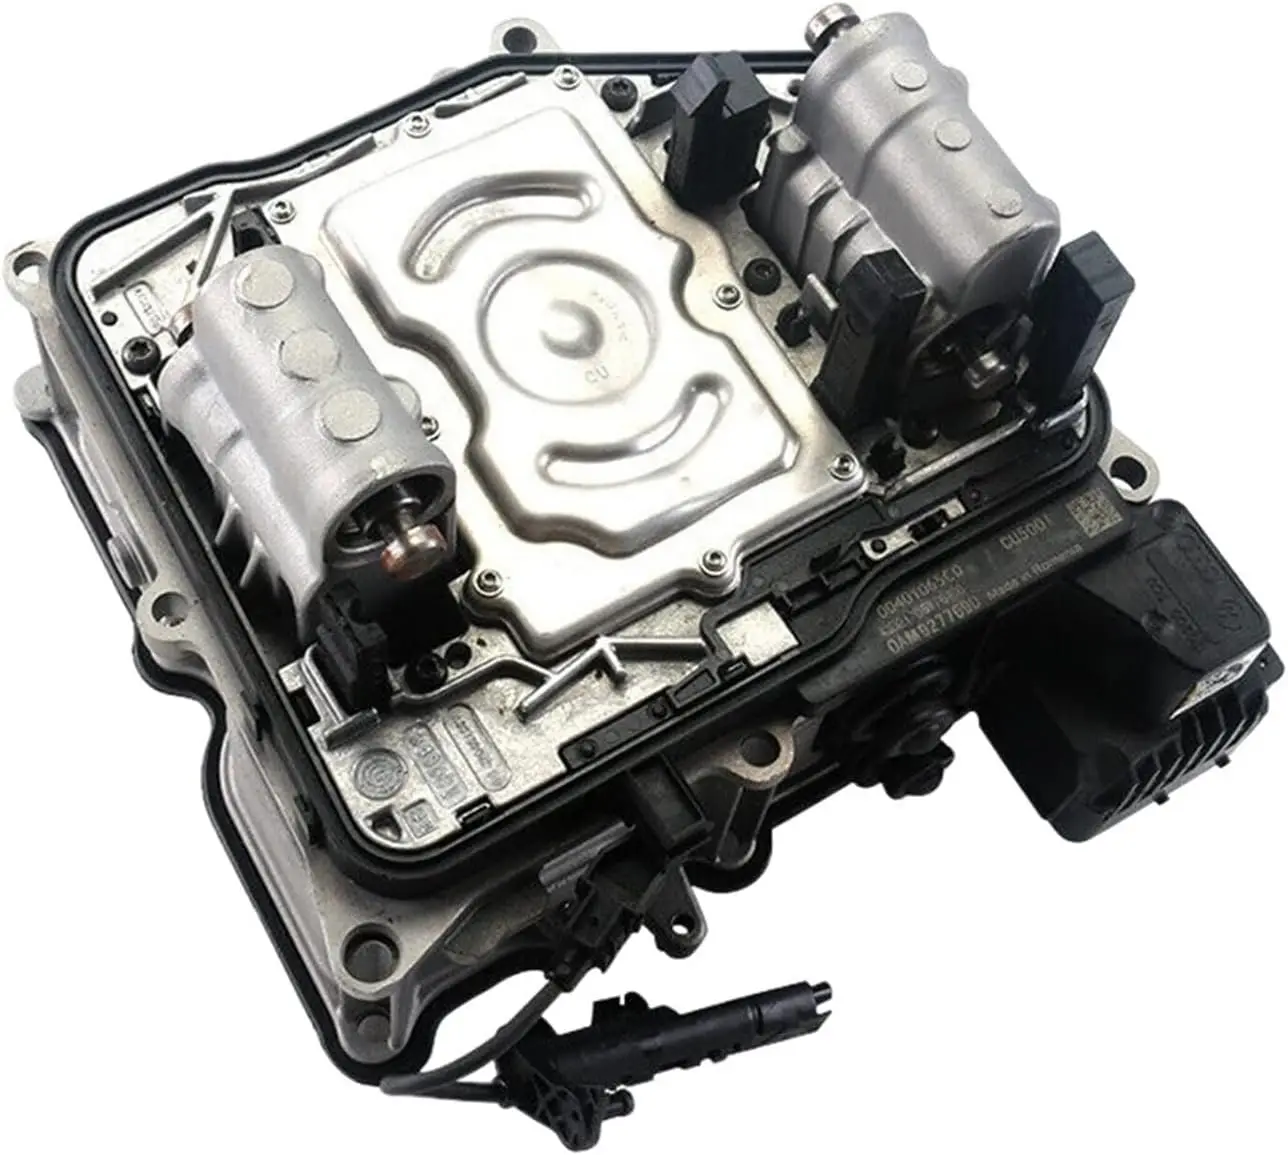 

DQ200 OAM Transmission 0AM Gearbox Mechatronic 0am325065s & 0am927769d Valve Body Compatible with VW Audi Skoda Seat